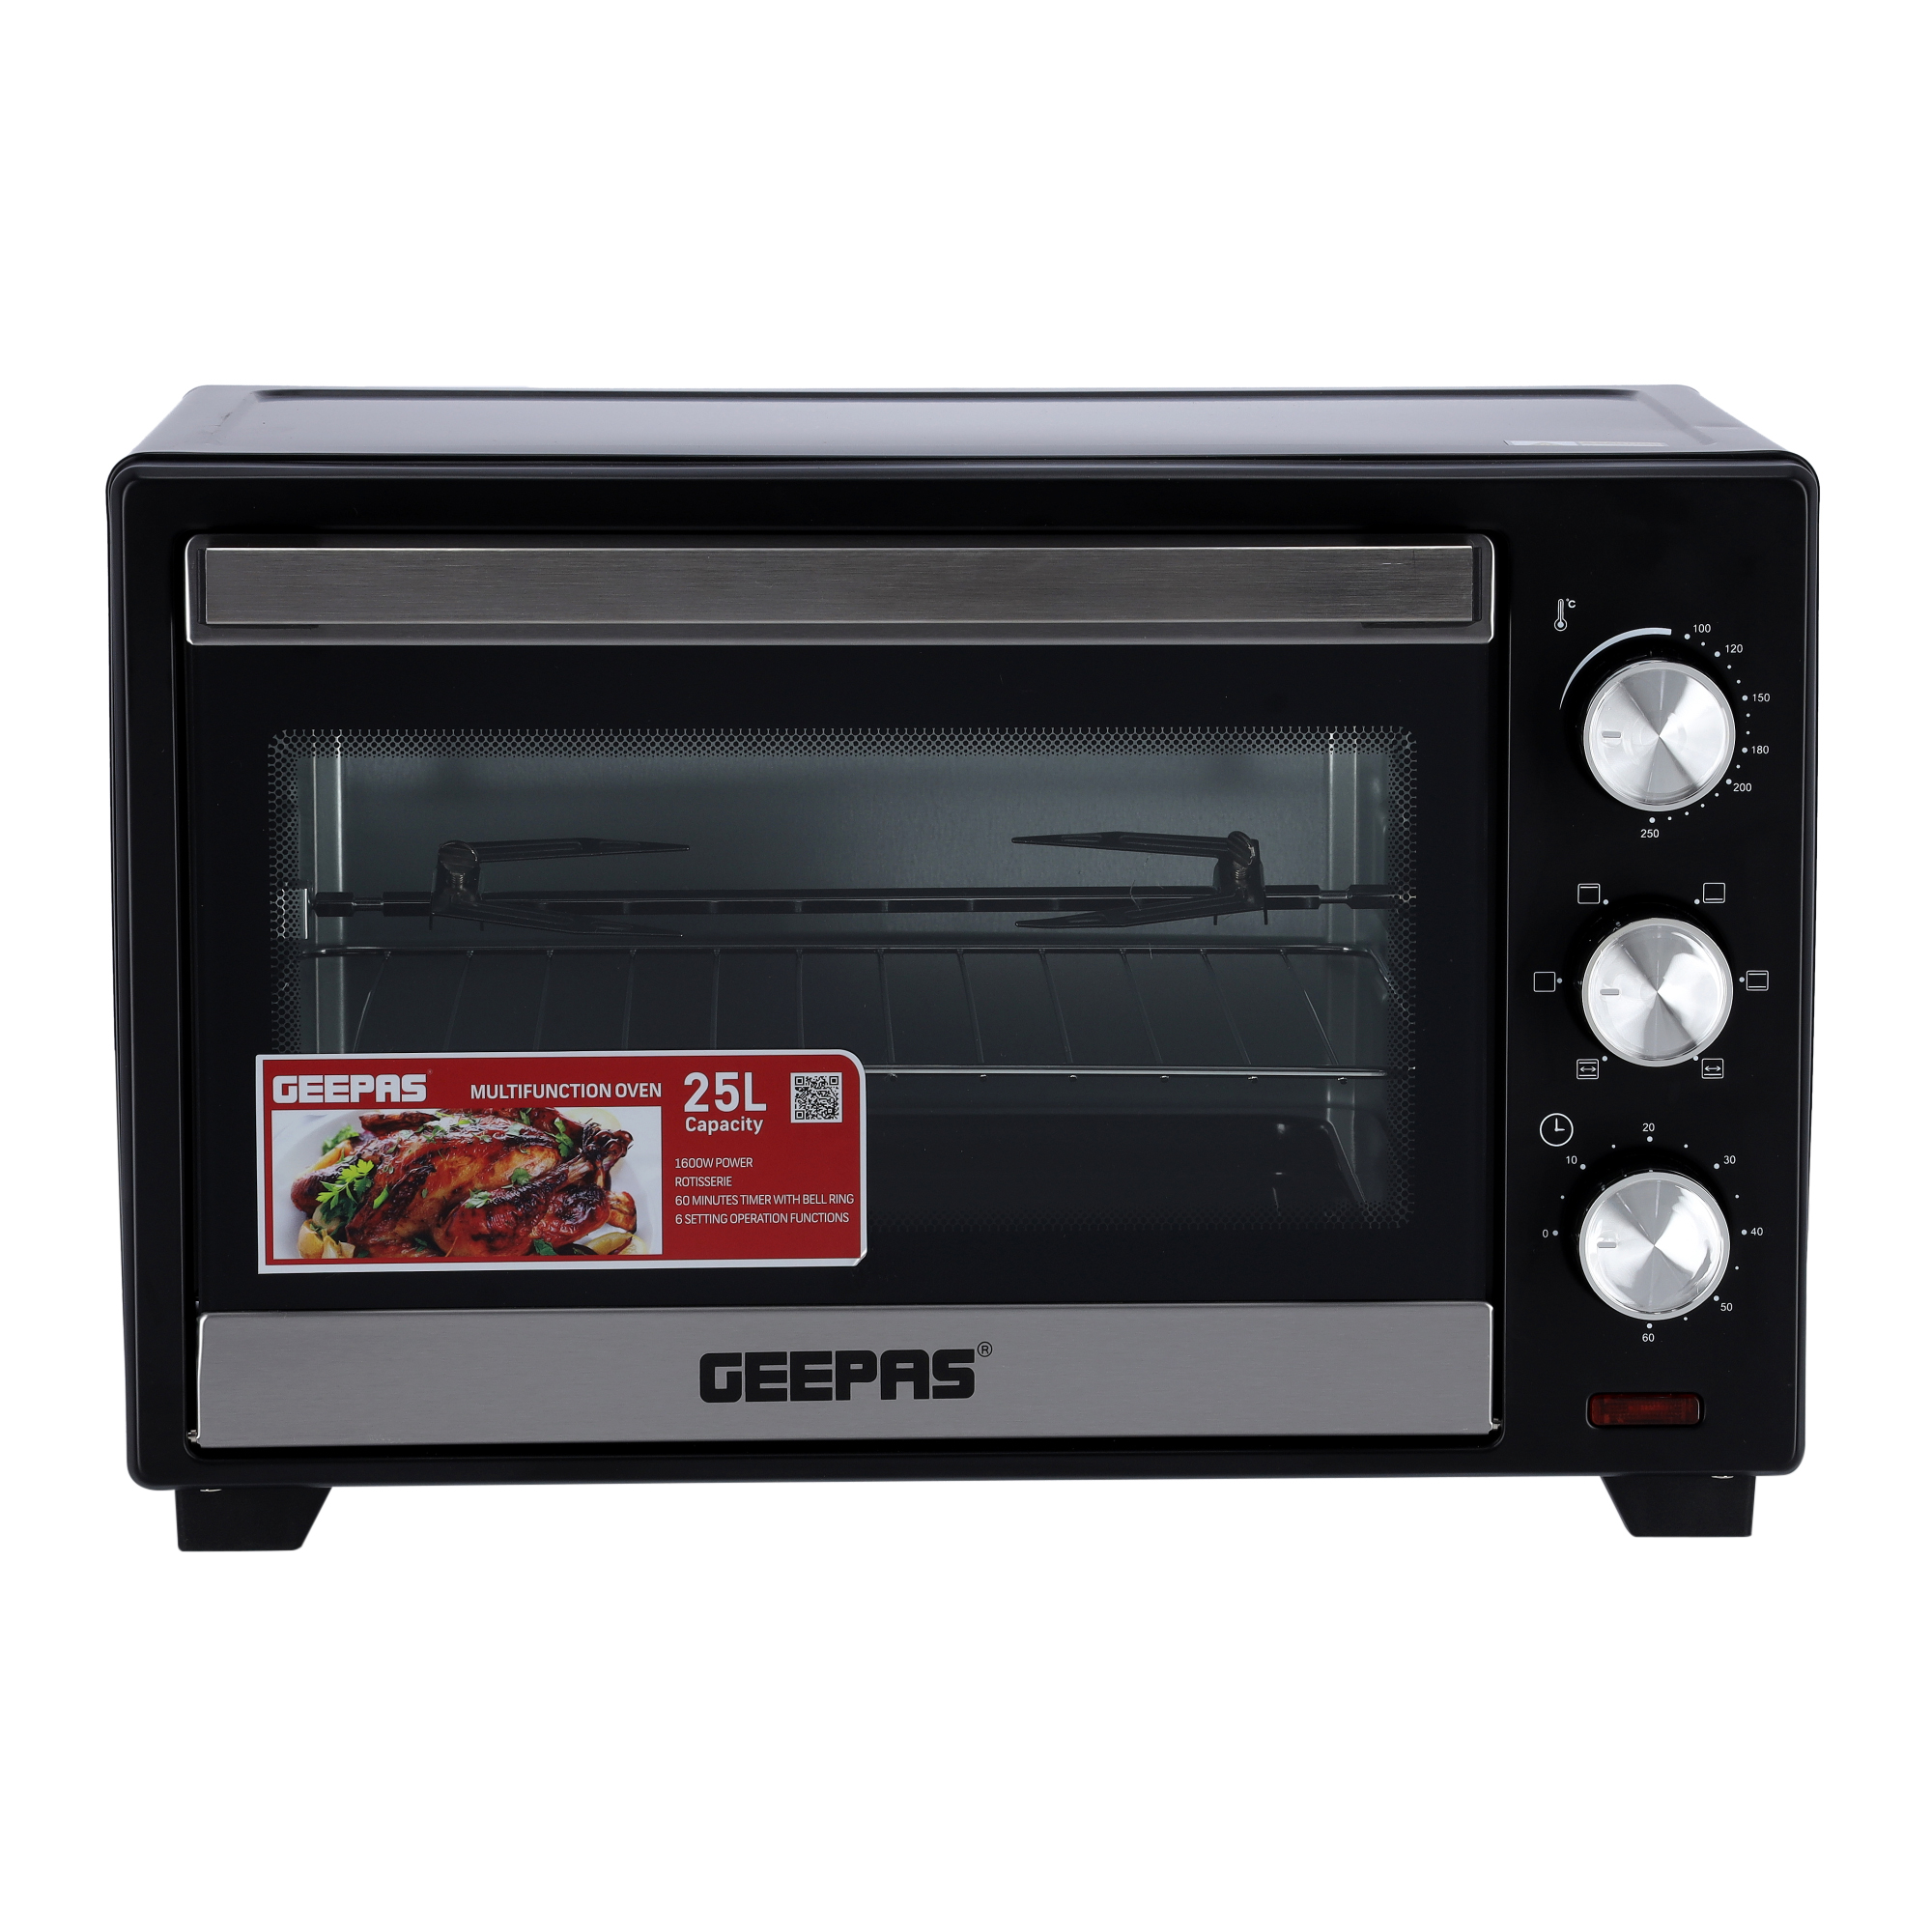 1380W & 60 Minutes Timer Accessories Included & Convection Function 2 Years Warranty Geepas 21L Mini Oven & Grill Rotisserie Function & 6 Selectors for Baking Roasting & Grilling 